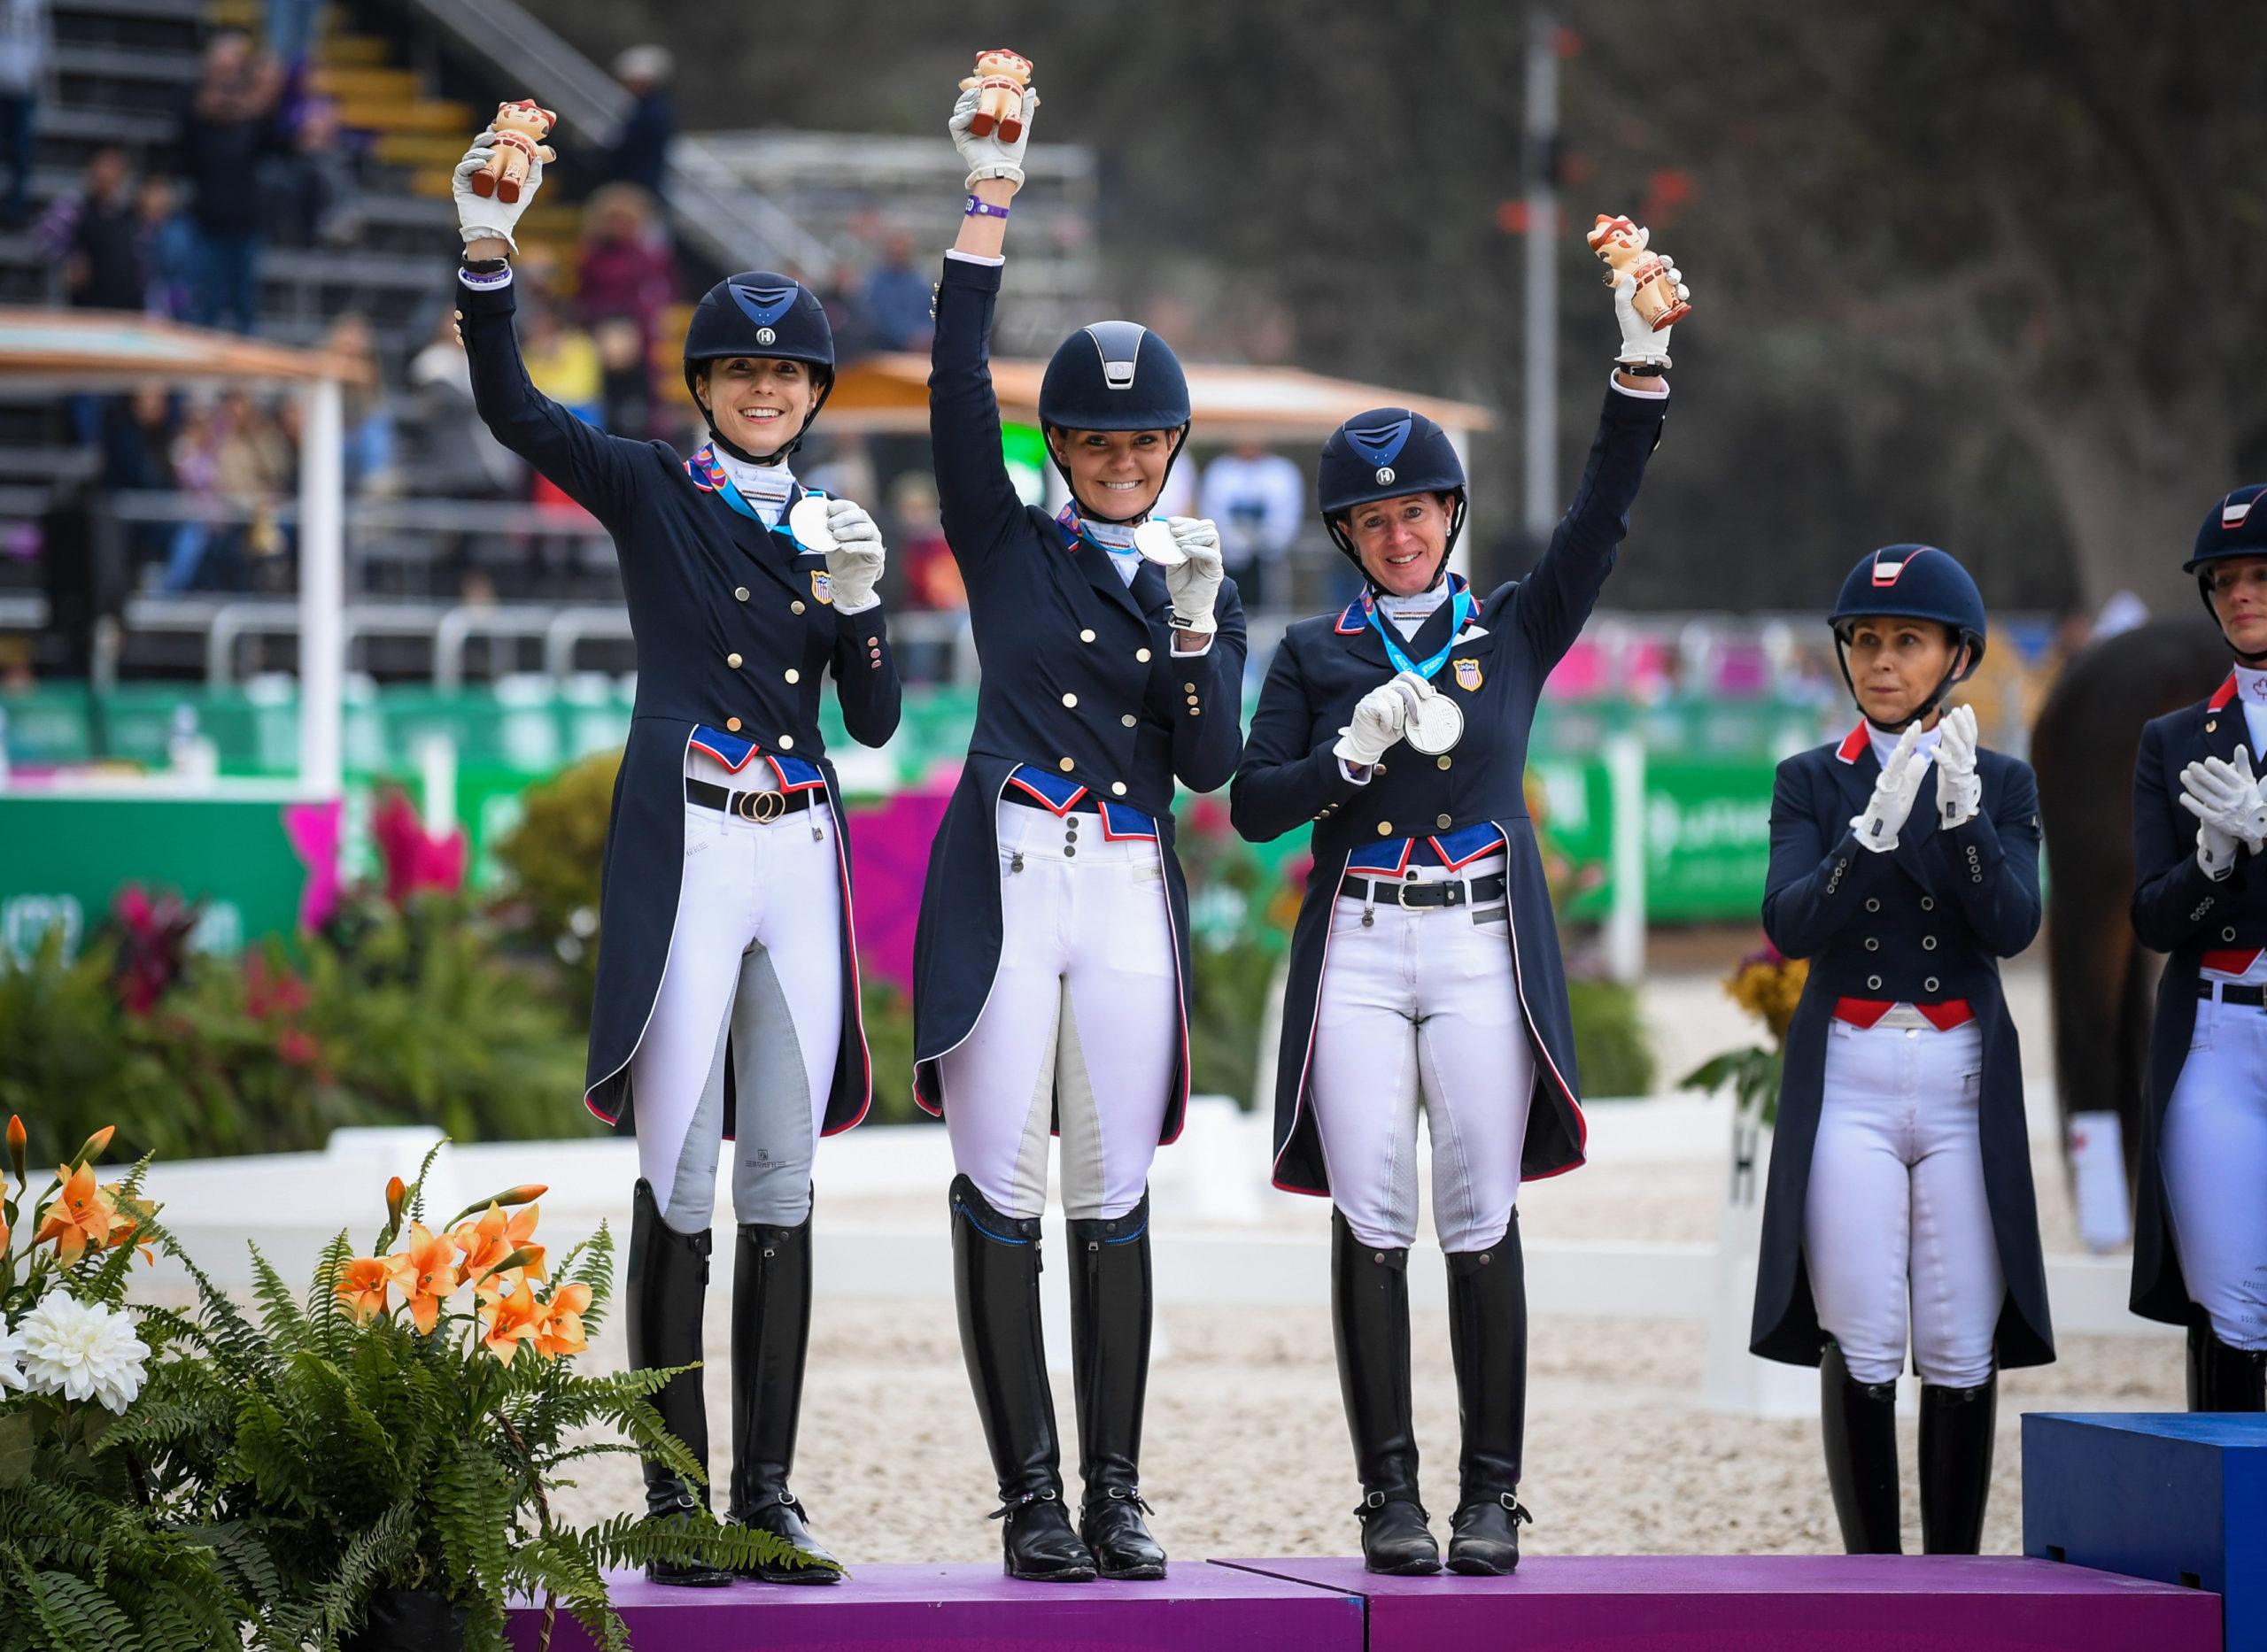 The U.S. Dressage Team kicked off the 2019 Pan American Games in Lima, Peru, with a team silver medal on Monday! Photo: Taylor Pence/US Equestrian